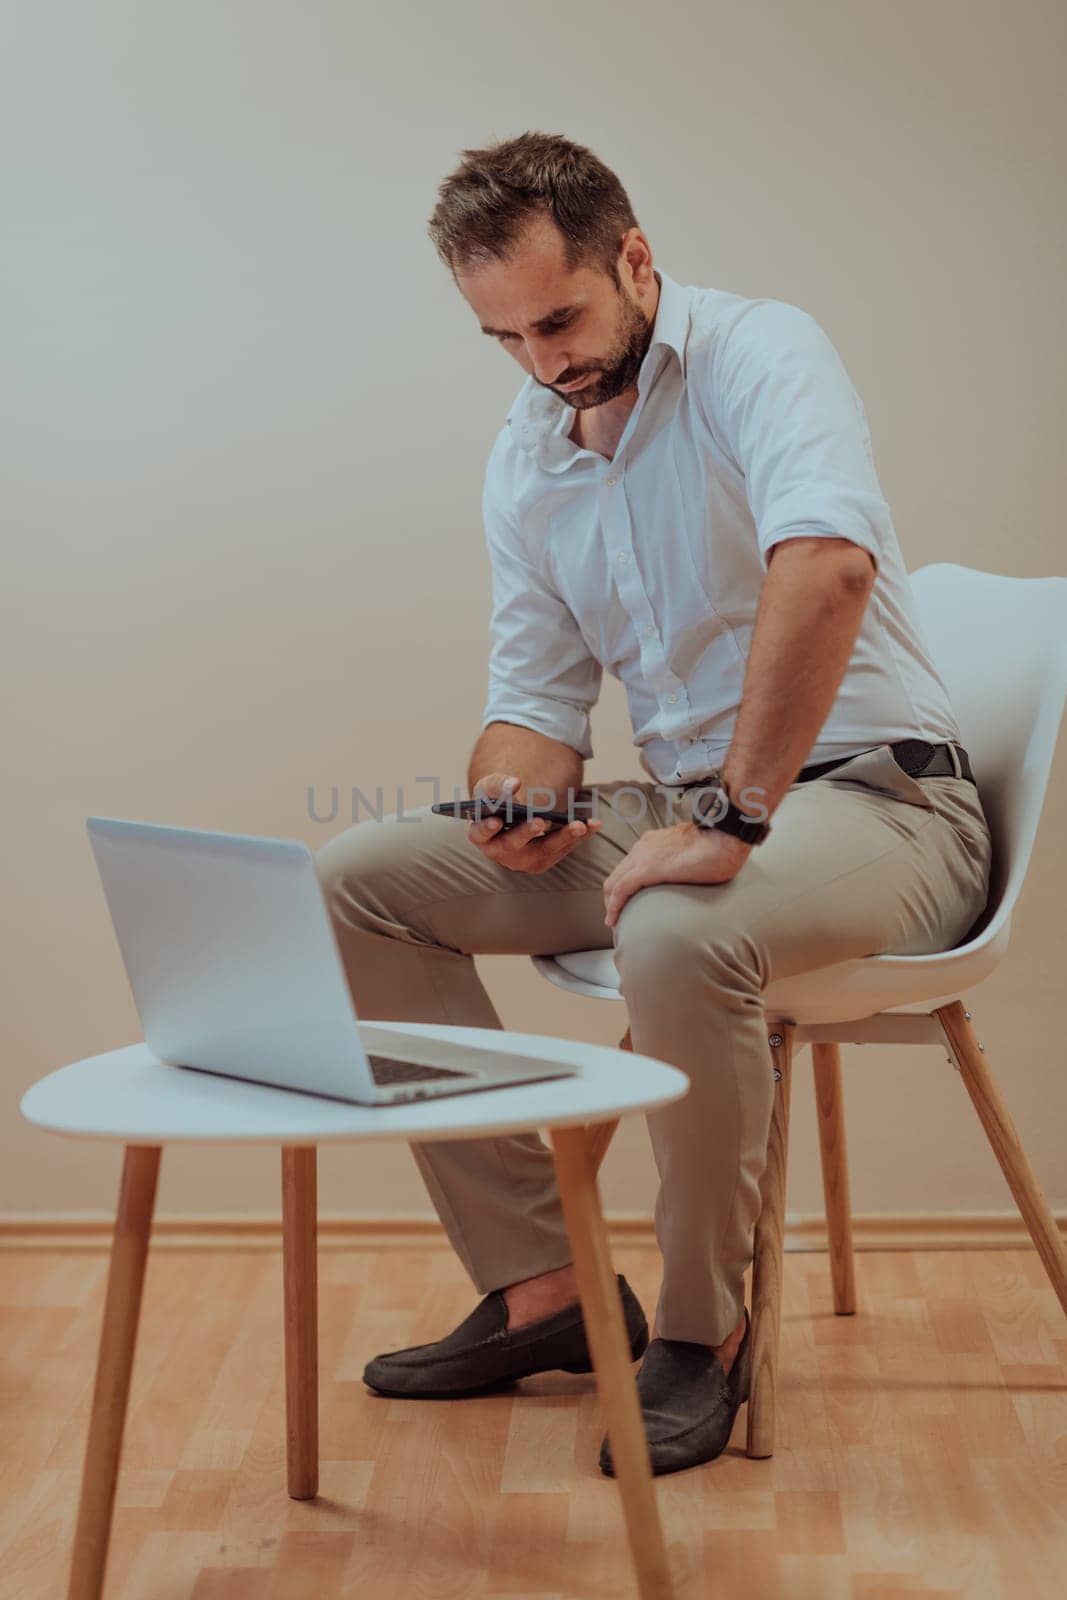 A confident businessman sitting and using laptop and smartphone with a determined expression, while a beige background enhances the professional atmosphere, showcasing his productivity and expertise. by dotshock